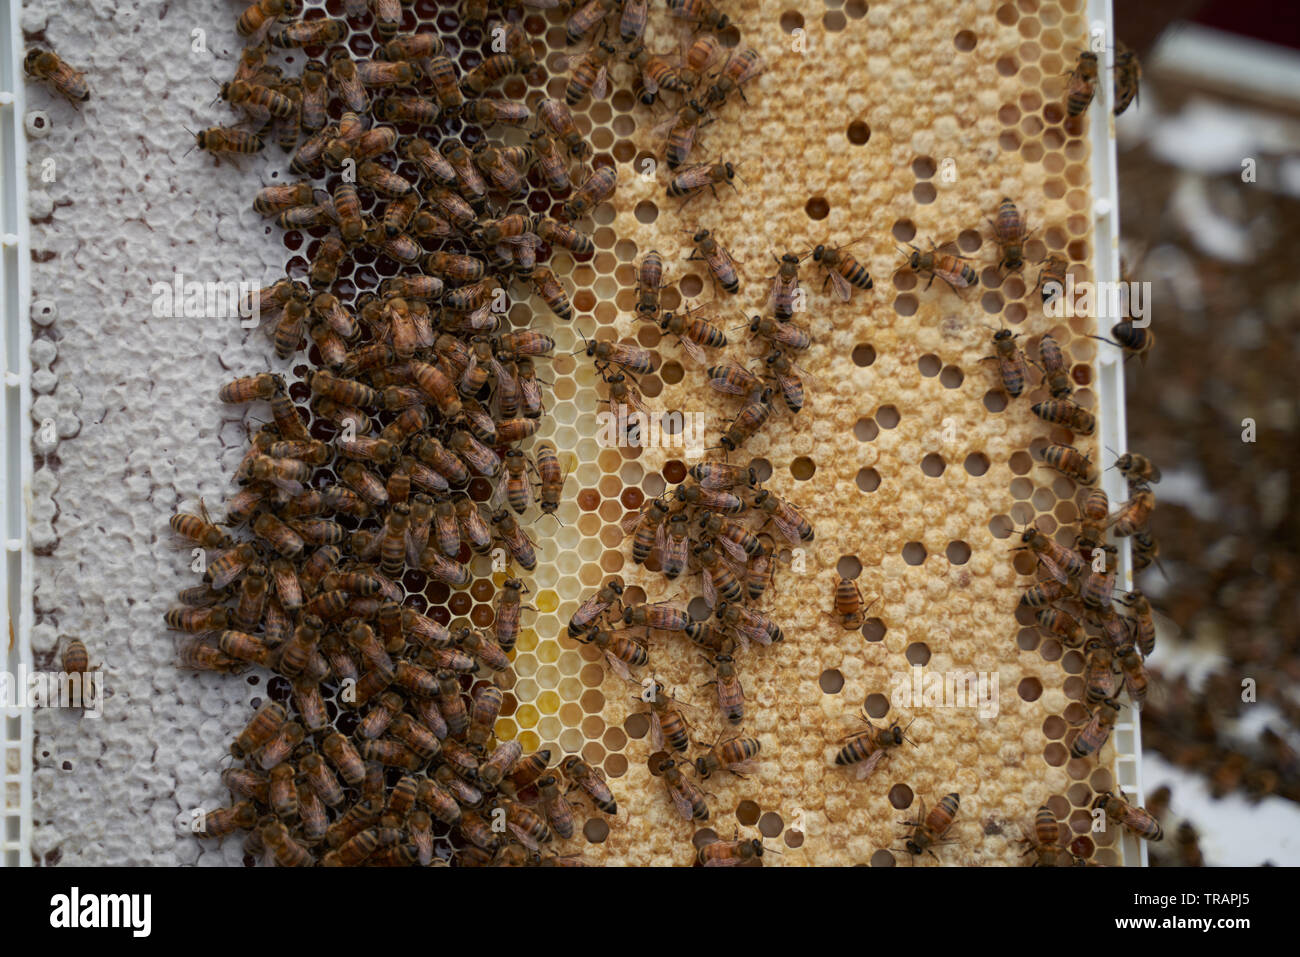 Worker bees on a frame. The white cells among the yellow ones are larval bees. Urban beeking has become much more popular in recent years. Stock Photo